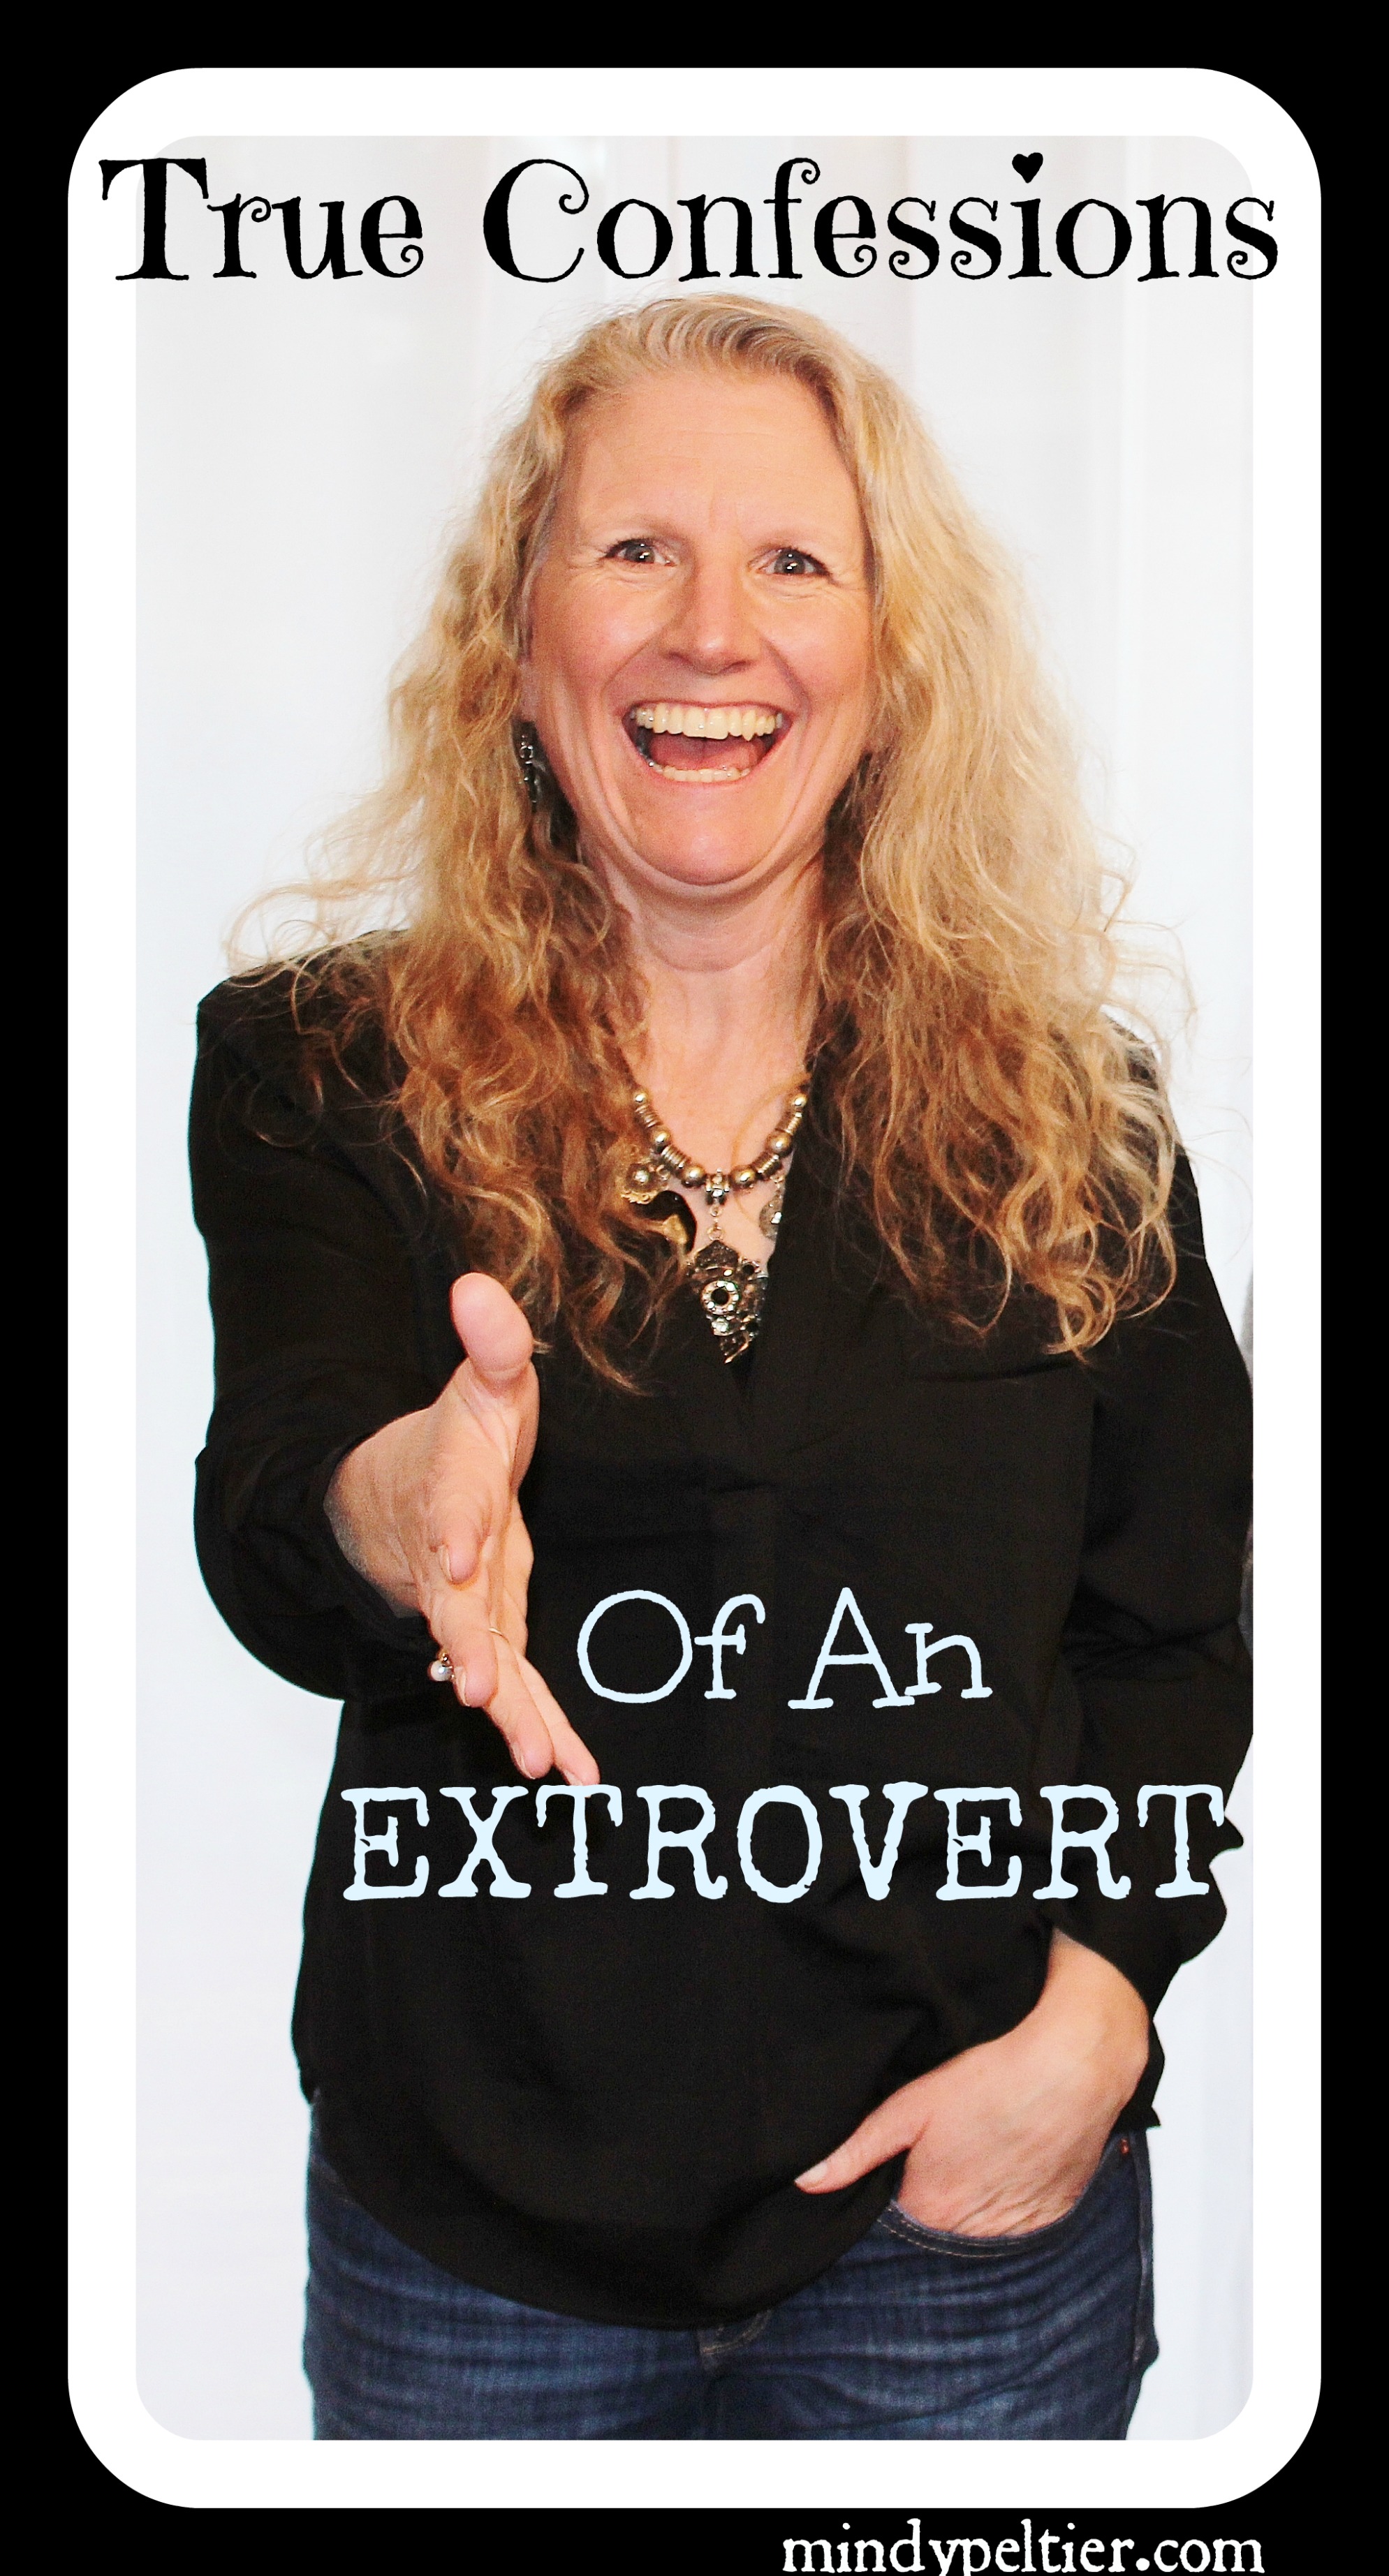 True Confessions of an Extrovert